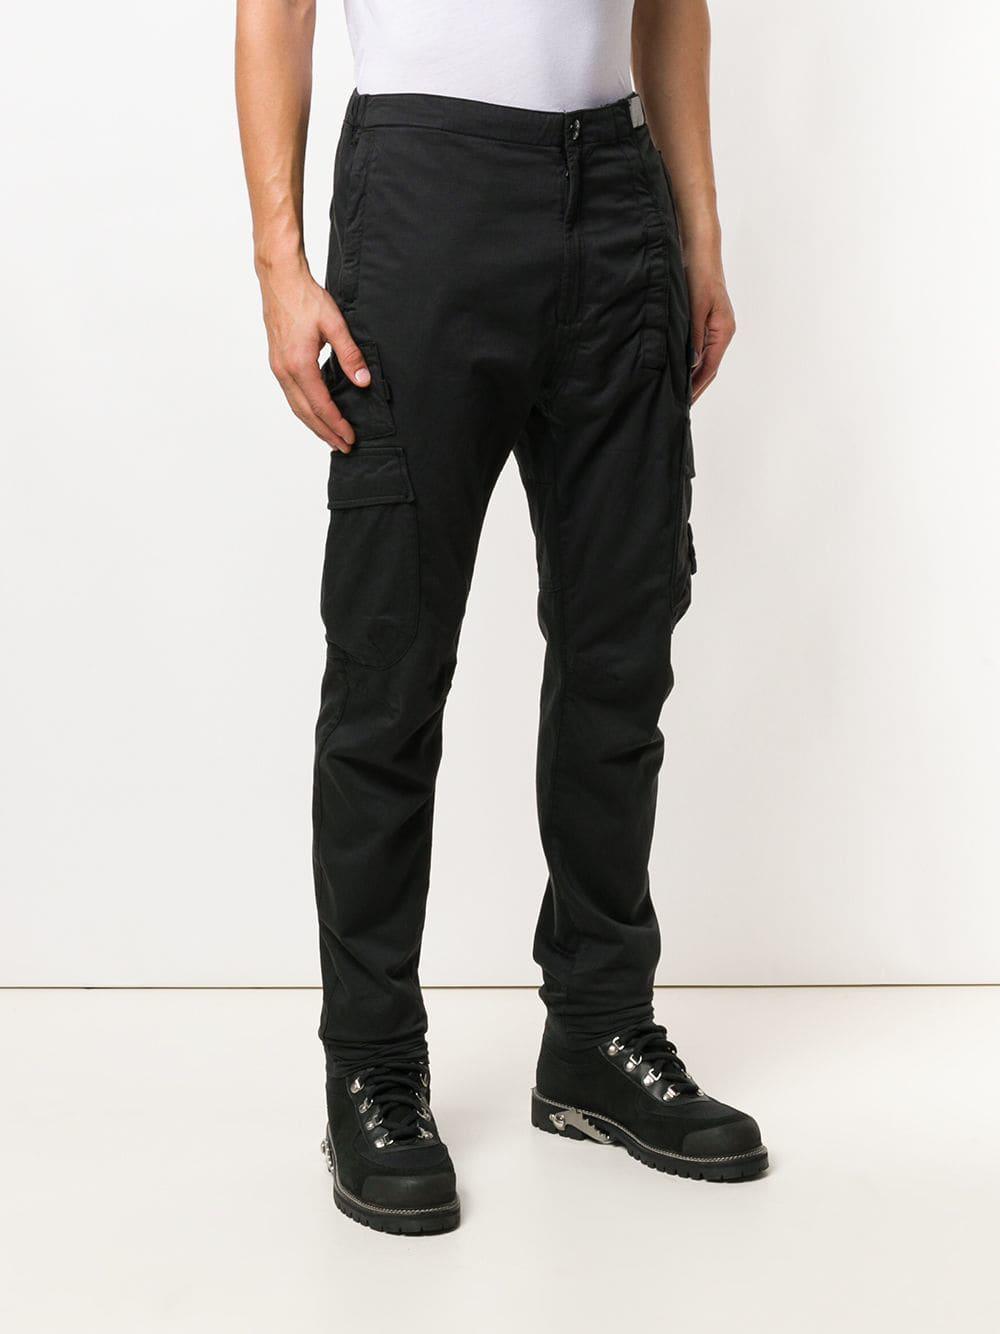 Stone Island Cotton Tapered Cargo Trousers in Black for Men - Lyst